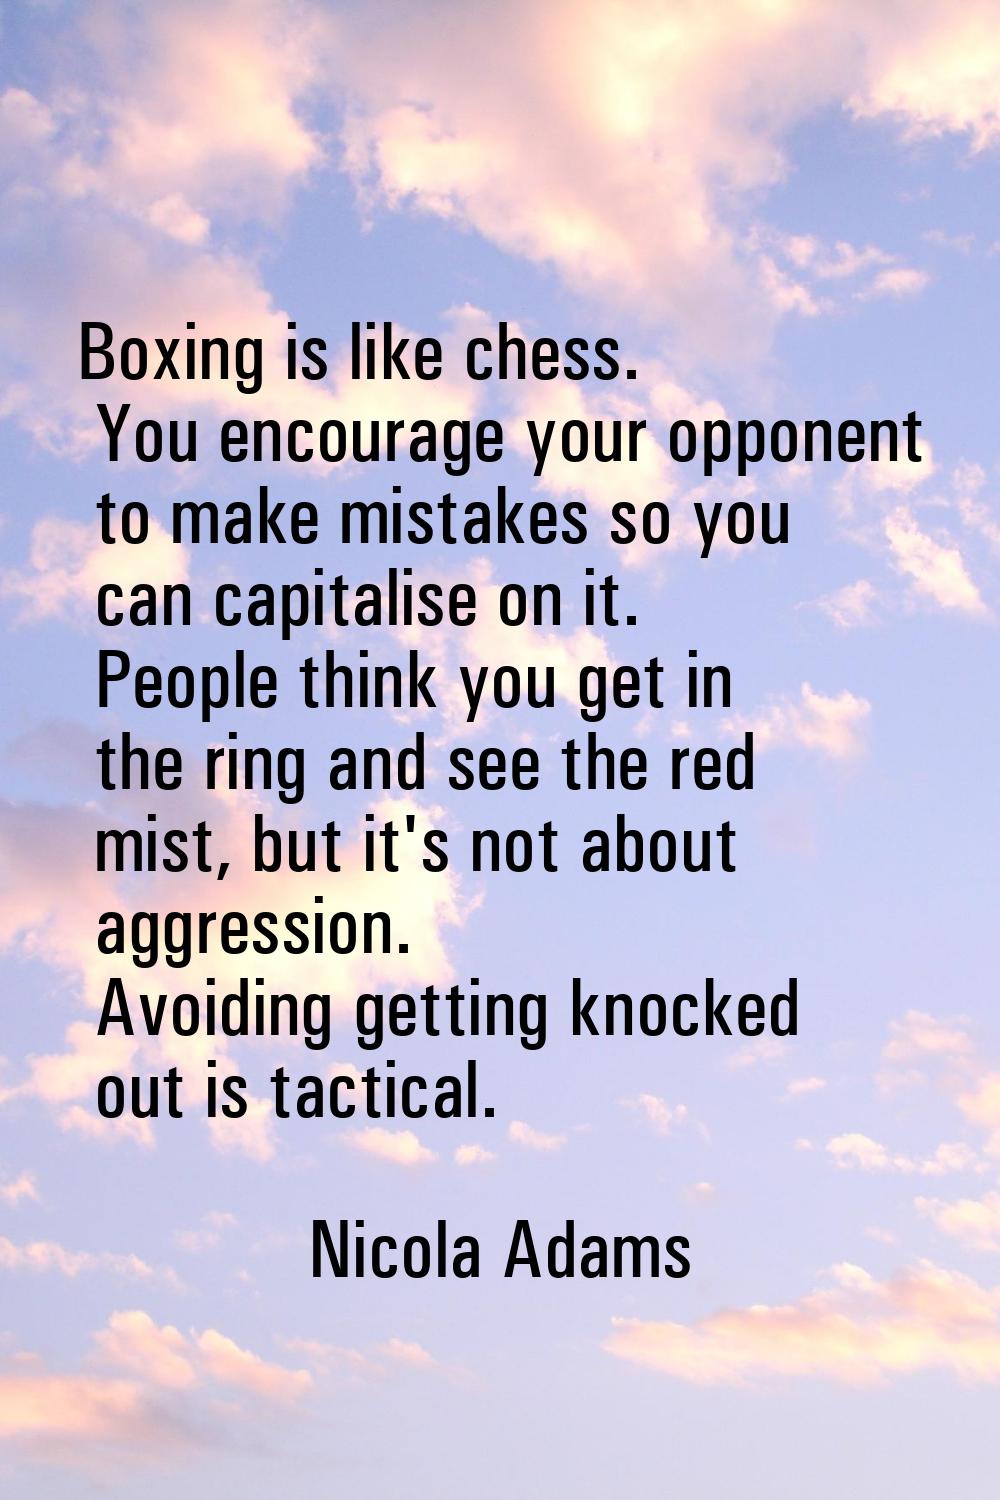 Boxing is like chess. You encourage your opponent to make mistakes so you can capitalise on it. Peo